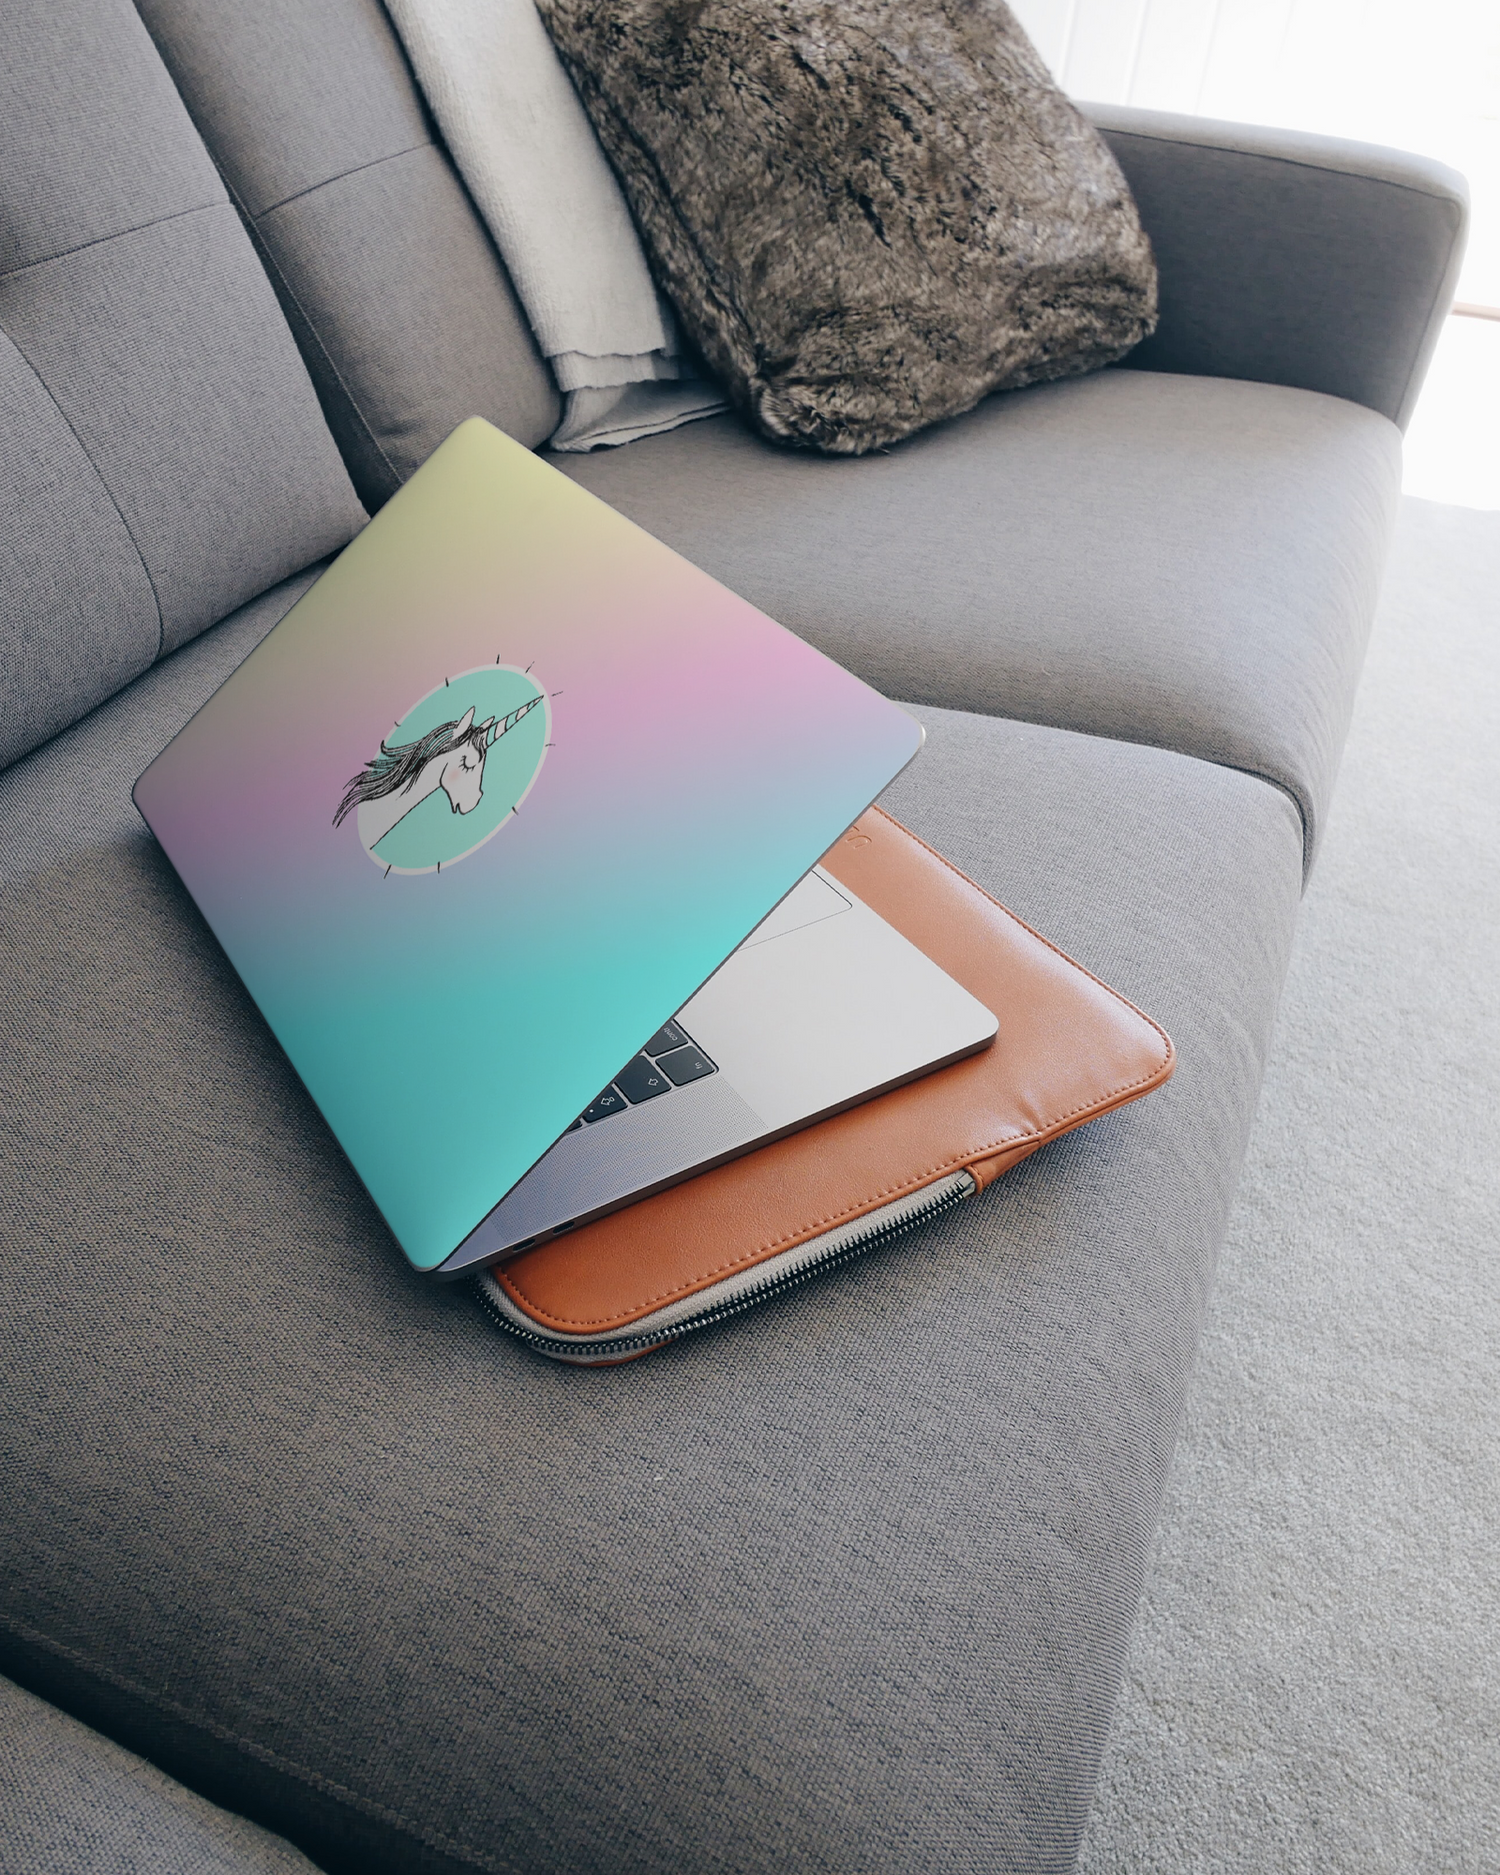 Happiness Unicorn Laptop Skin for 15 inch Apple MacBooks on a couch